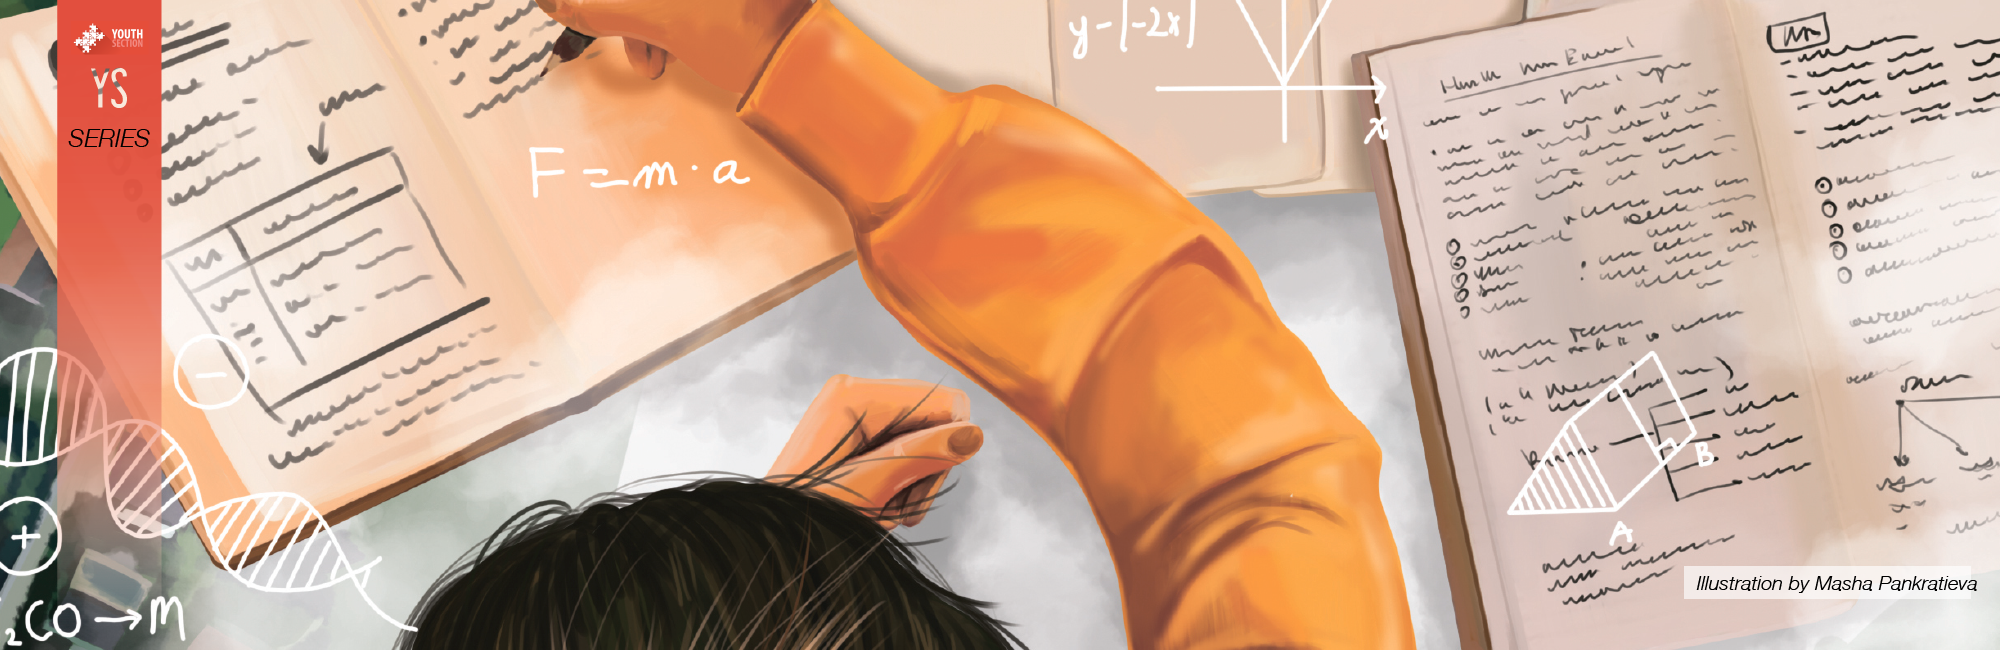 An original illustration of a young girl in an orange hoodie sitting at the desk and working on her homework studies.